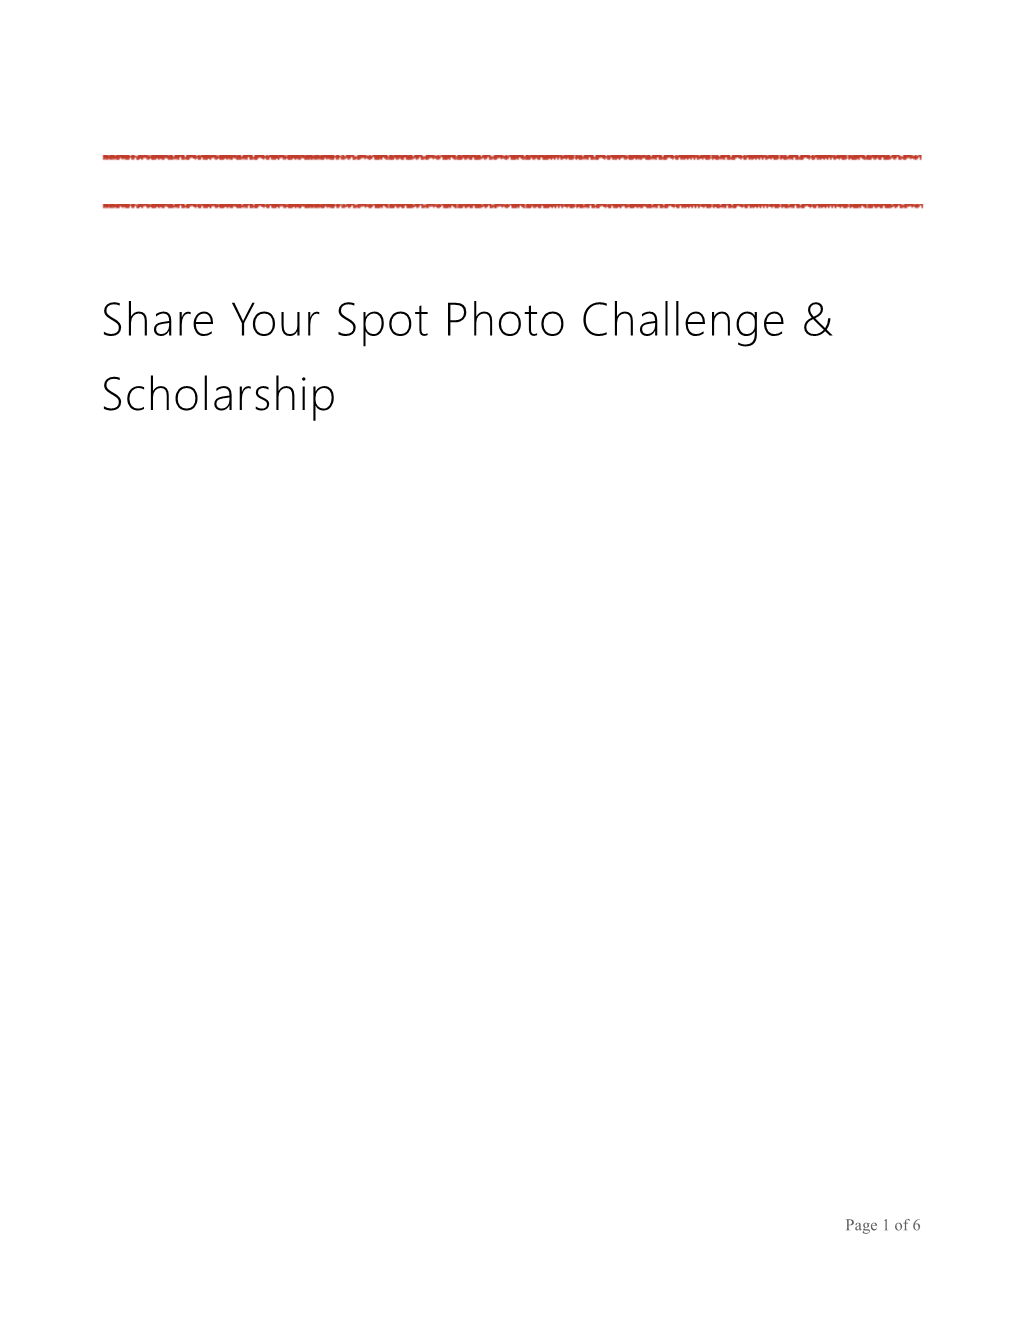 Share Your Spot Photo Challenge & Scholarship